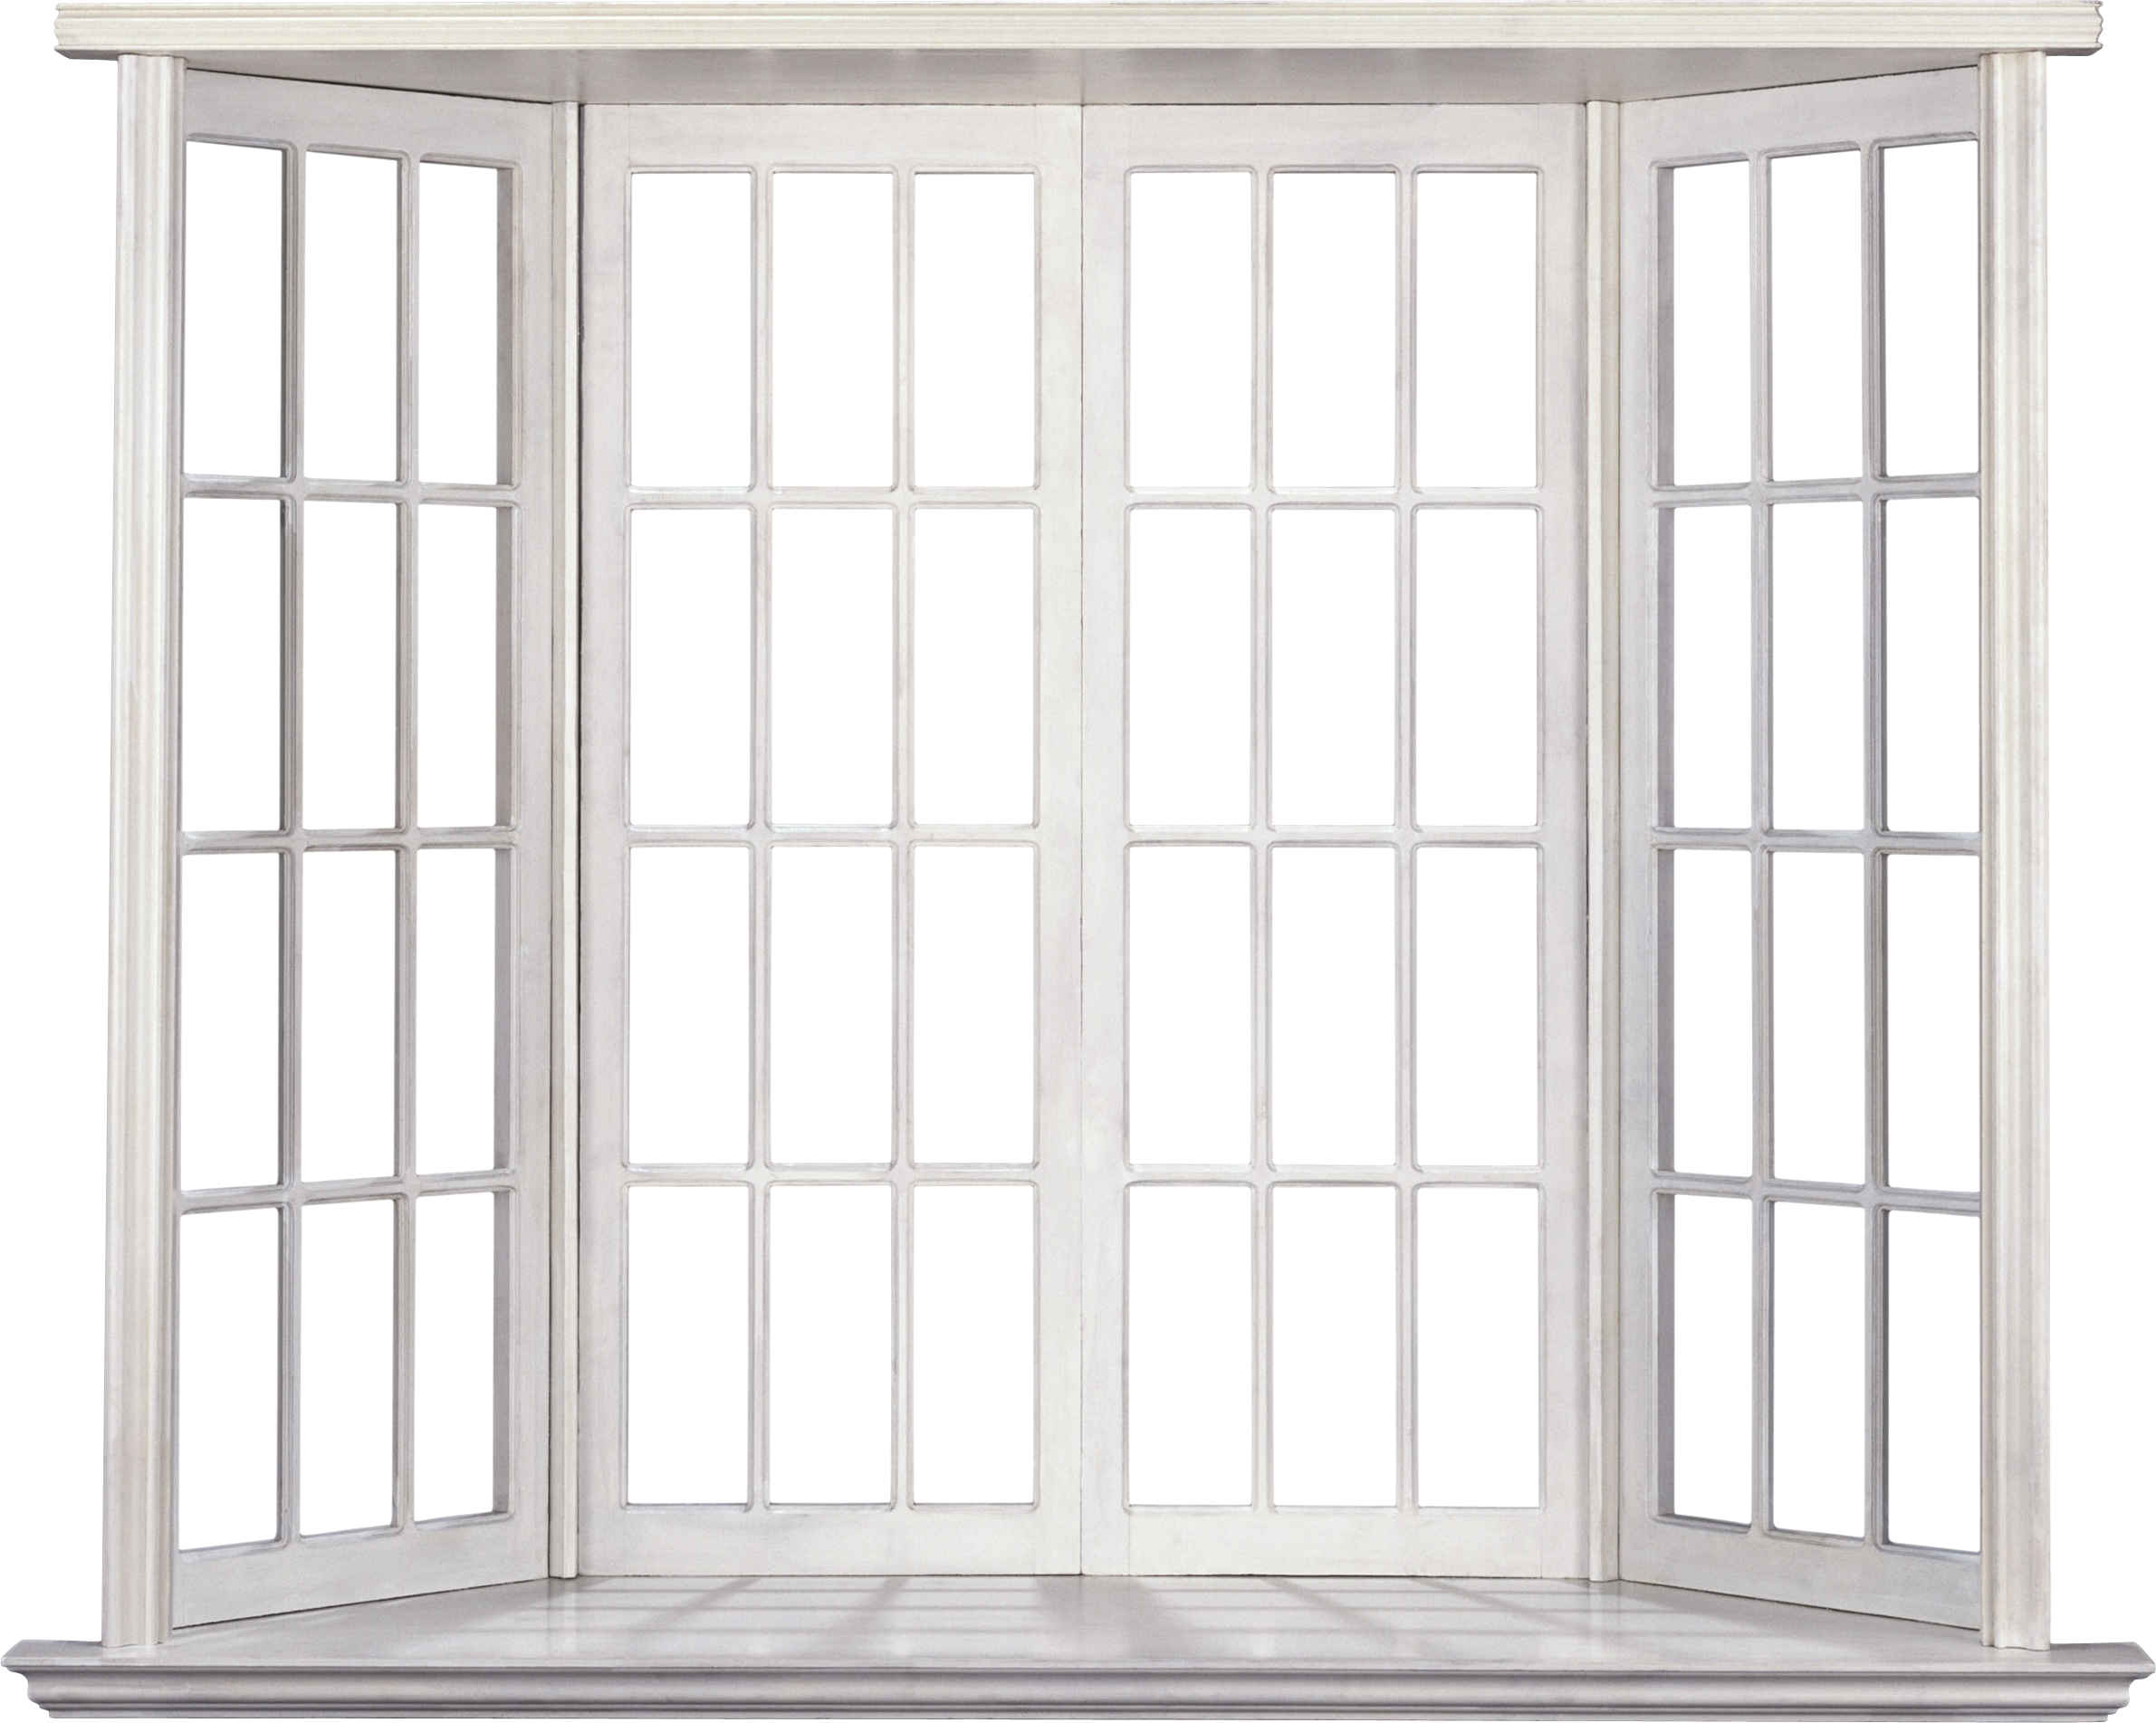 House Window PNG Image